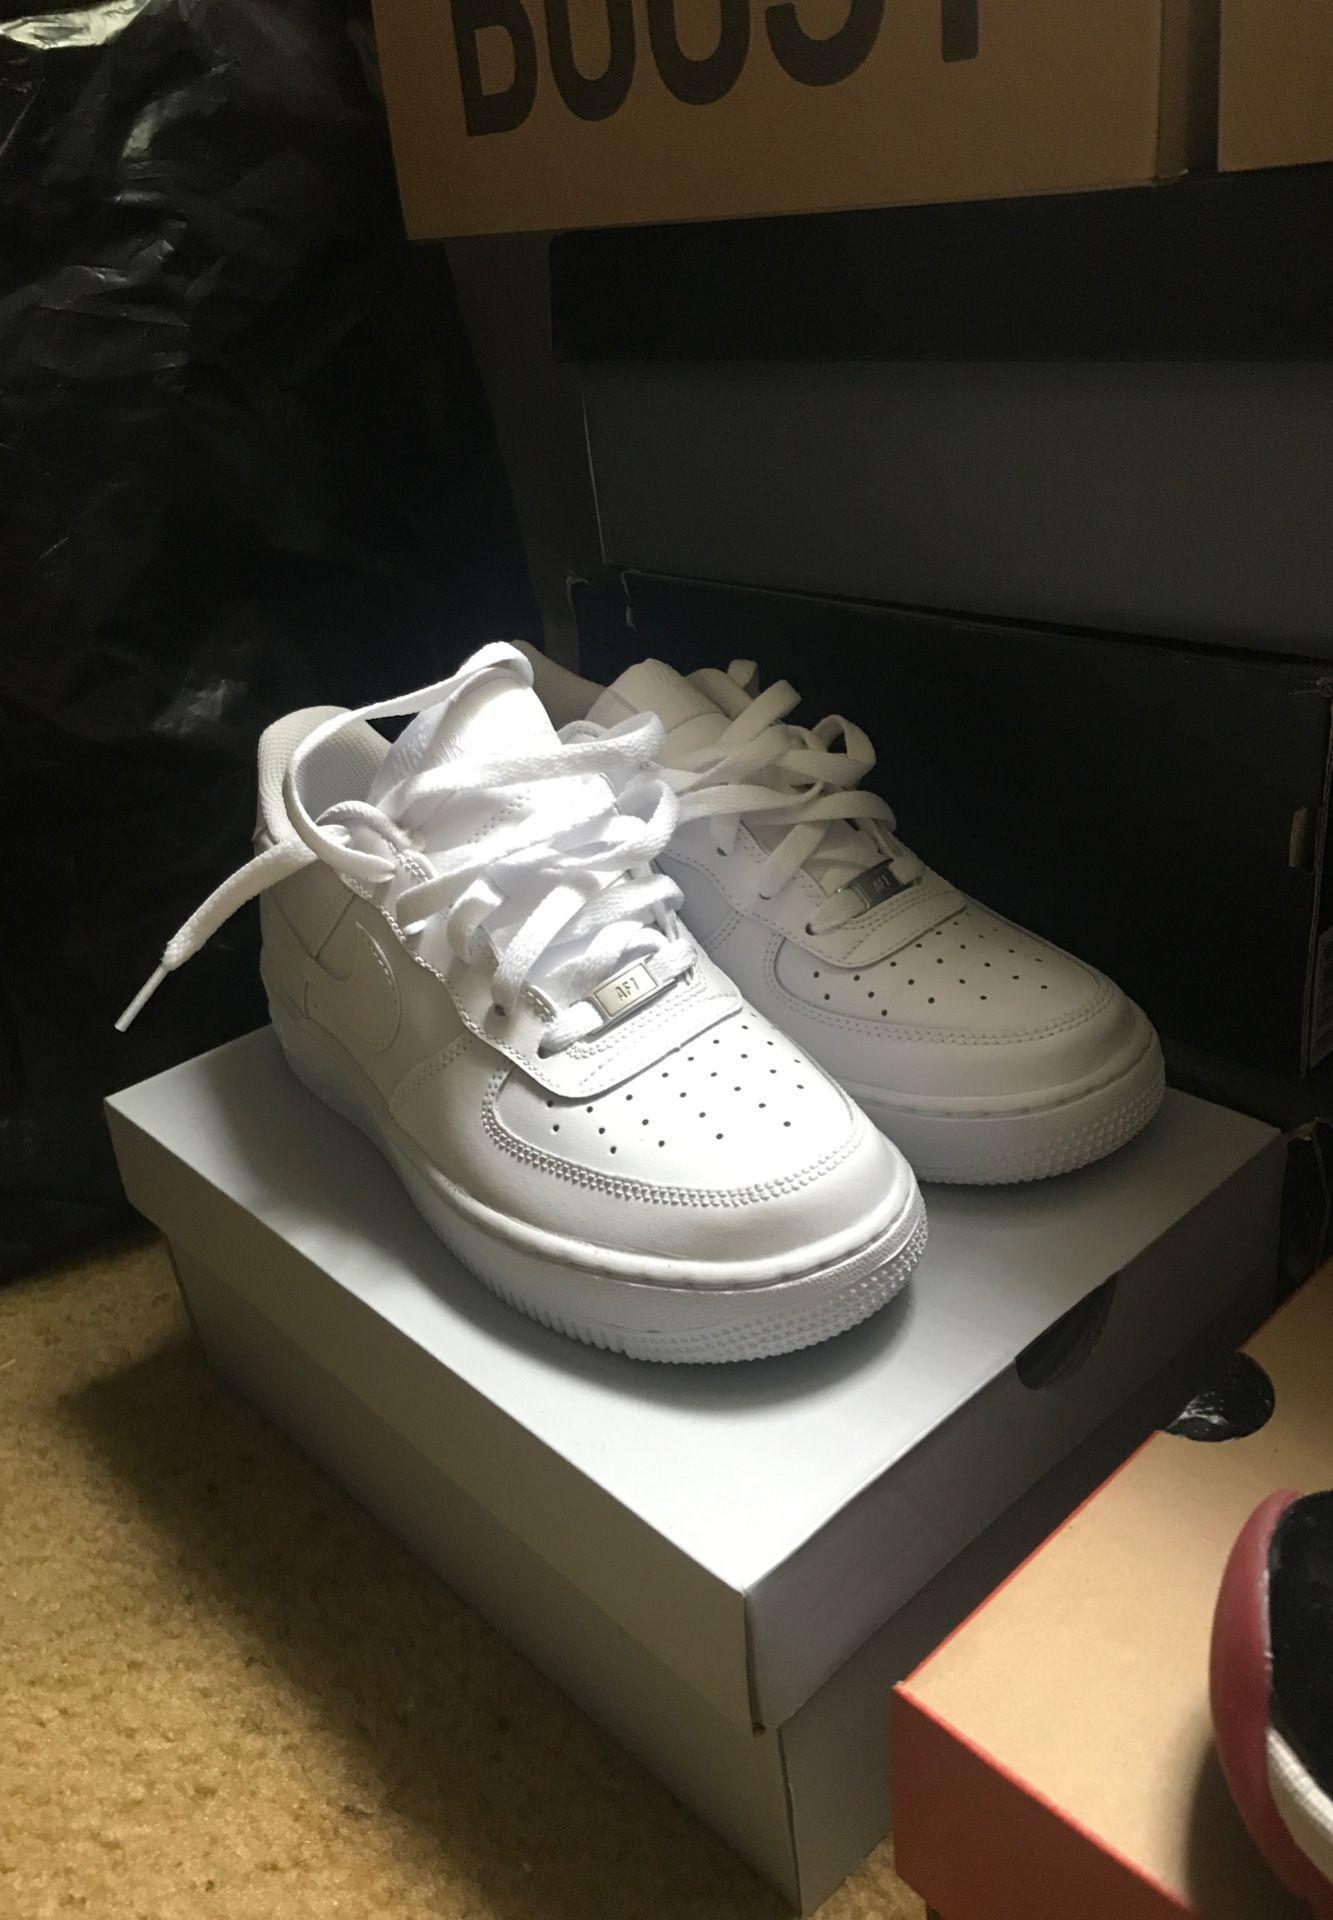 Nike Airforce 1 low size 7